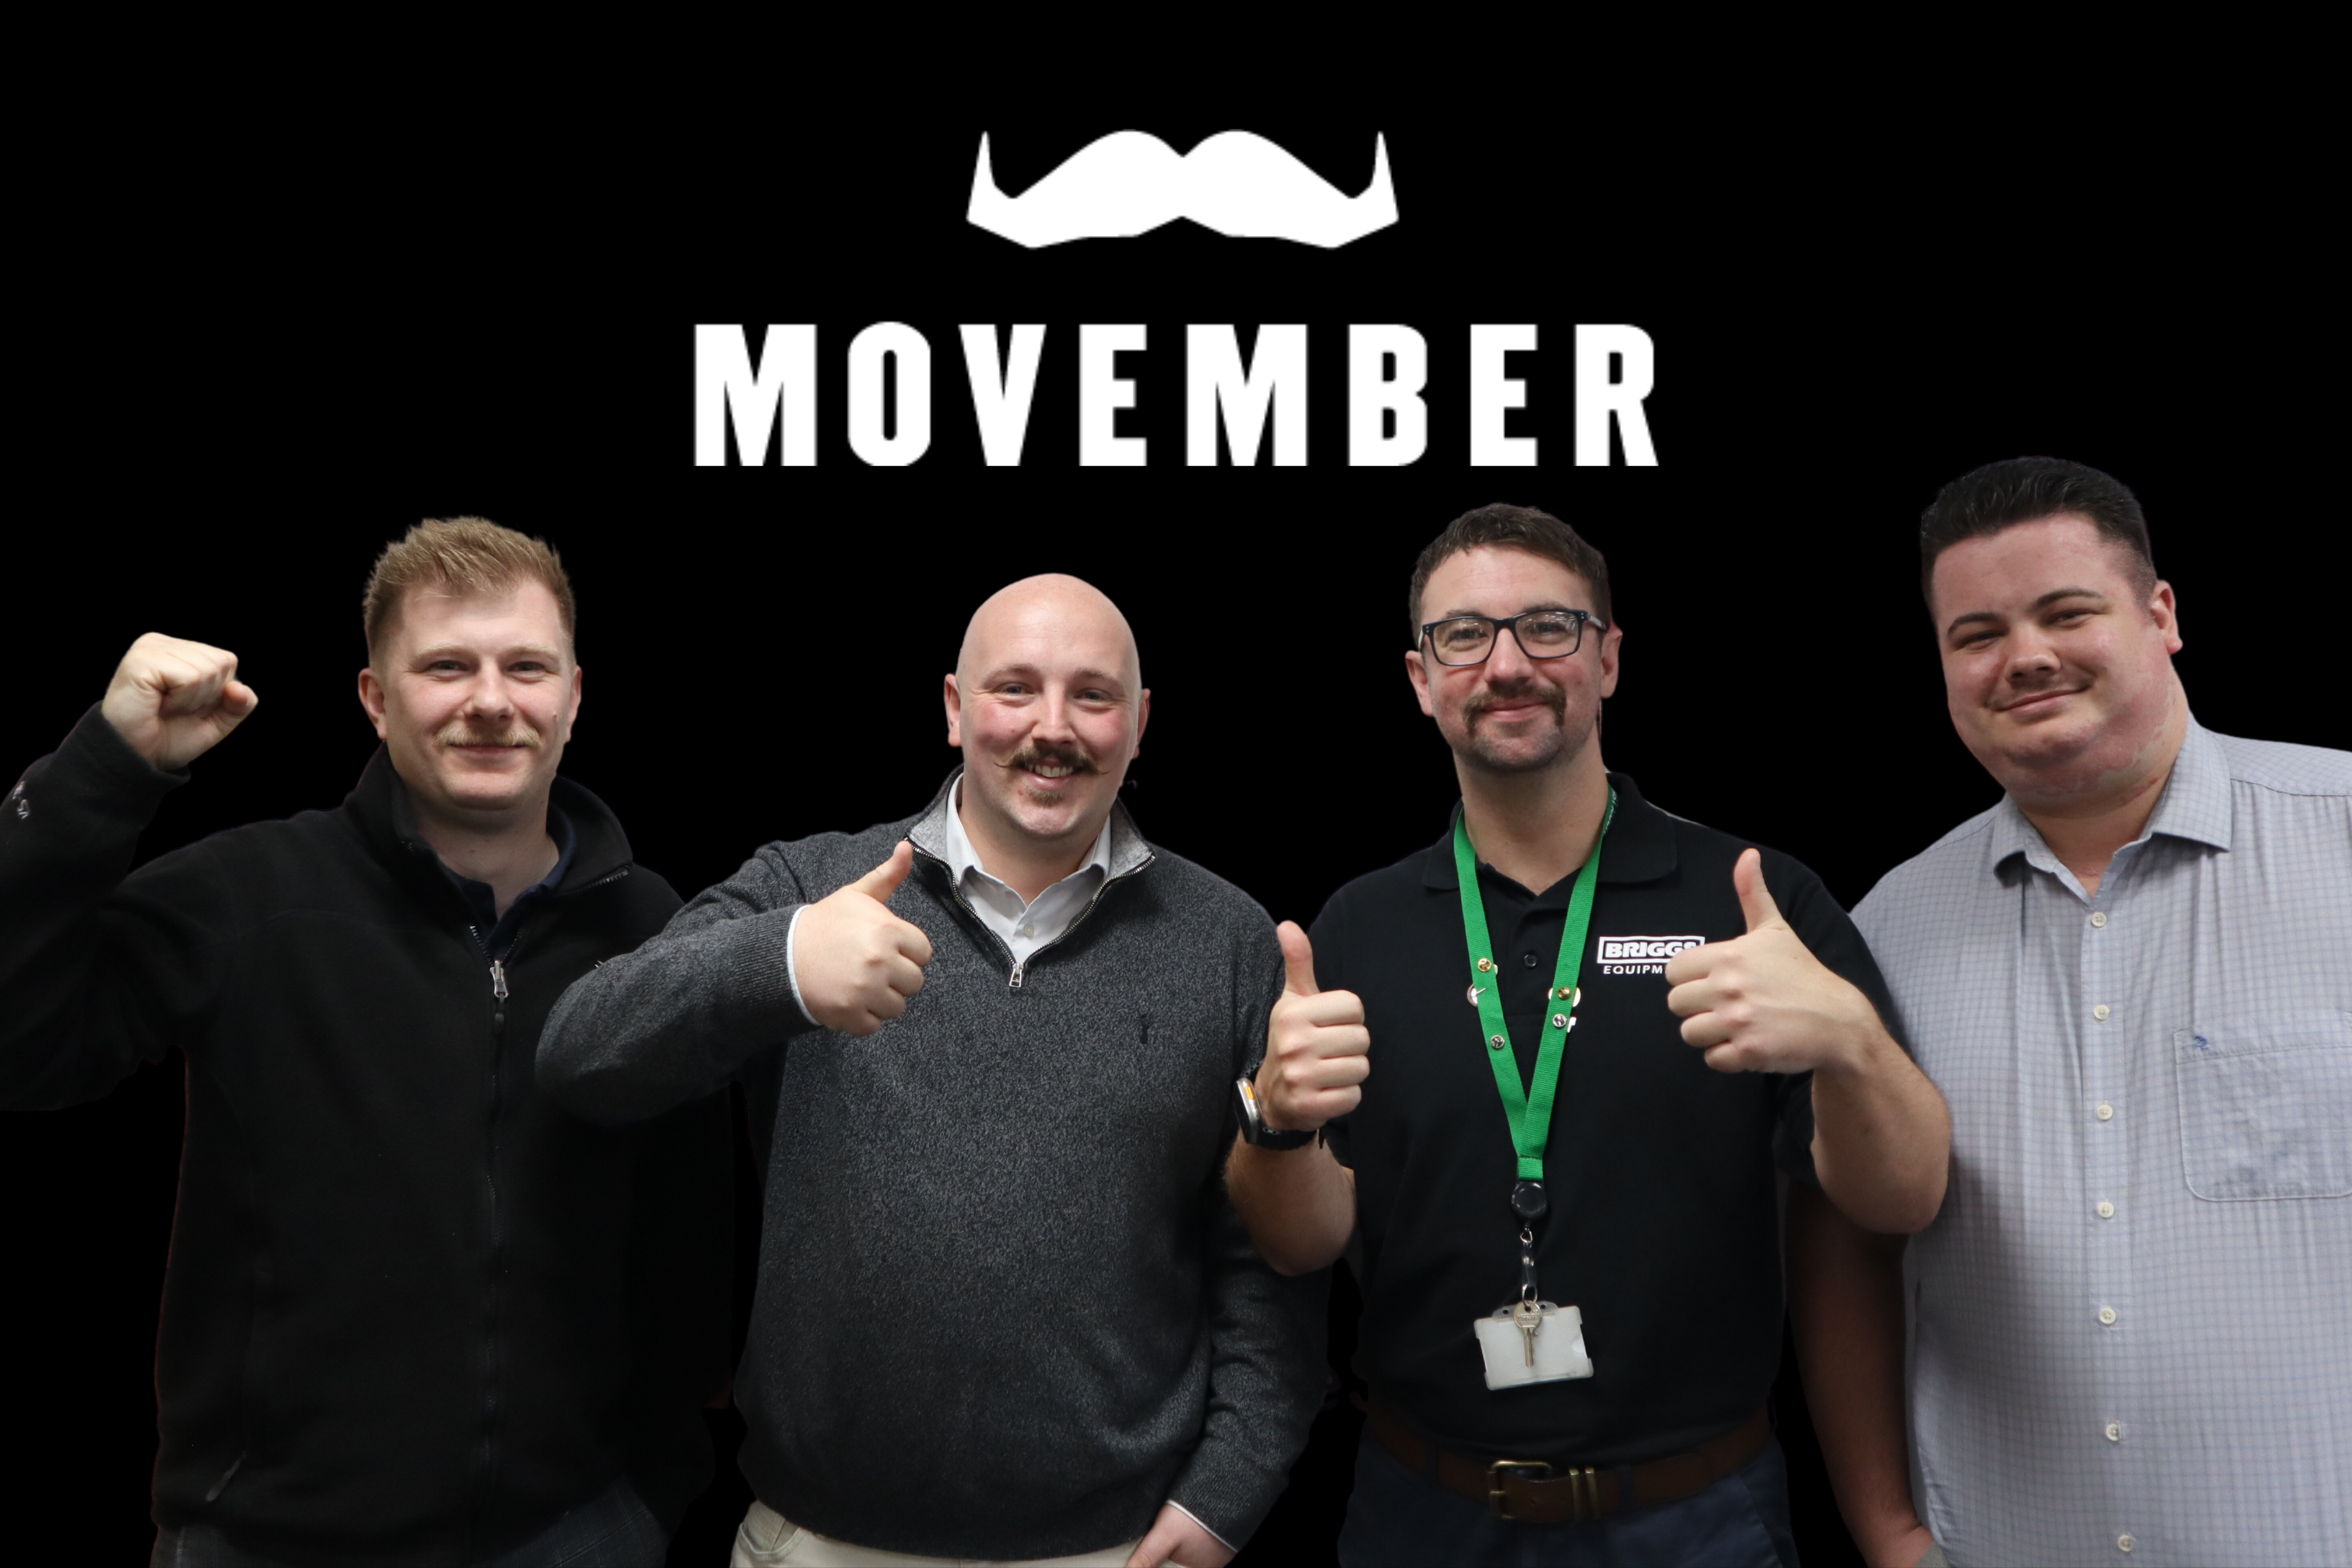 Wellbeing - Movember